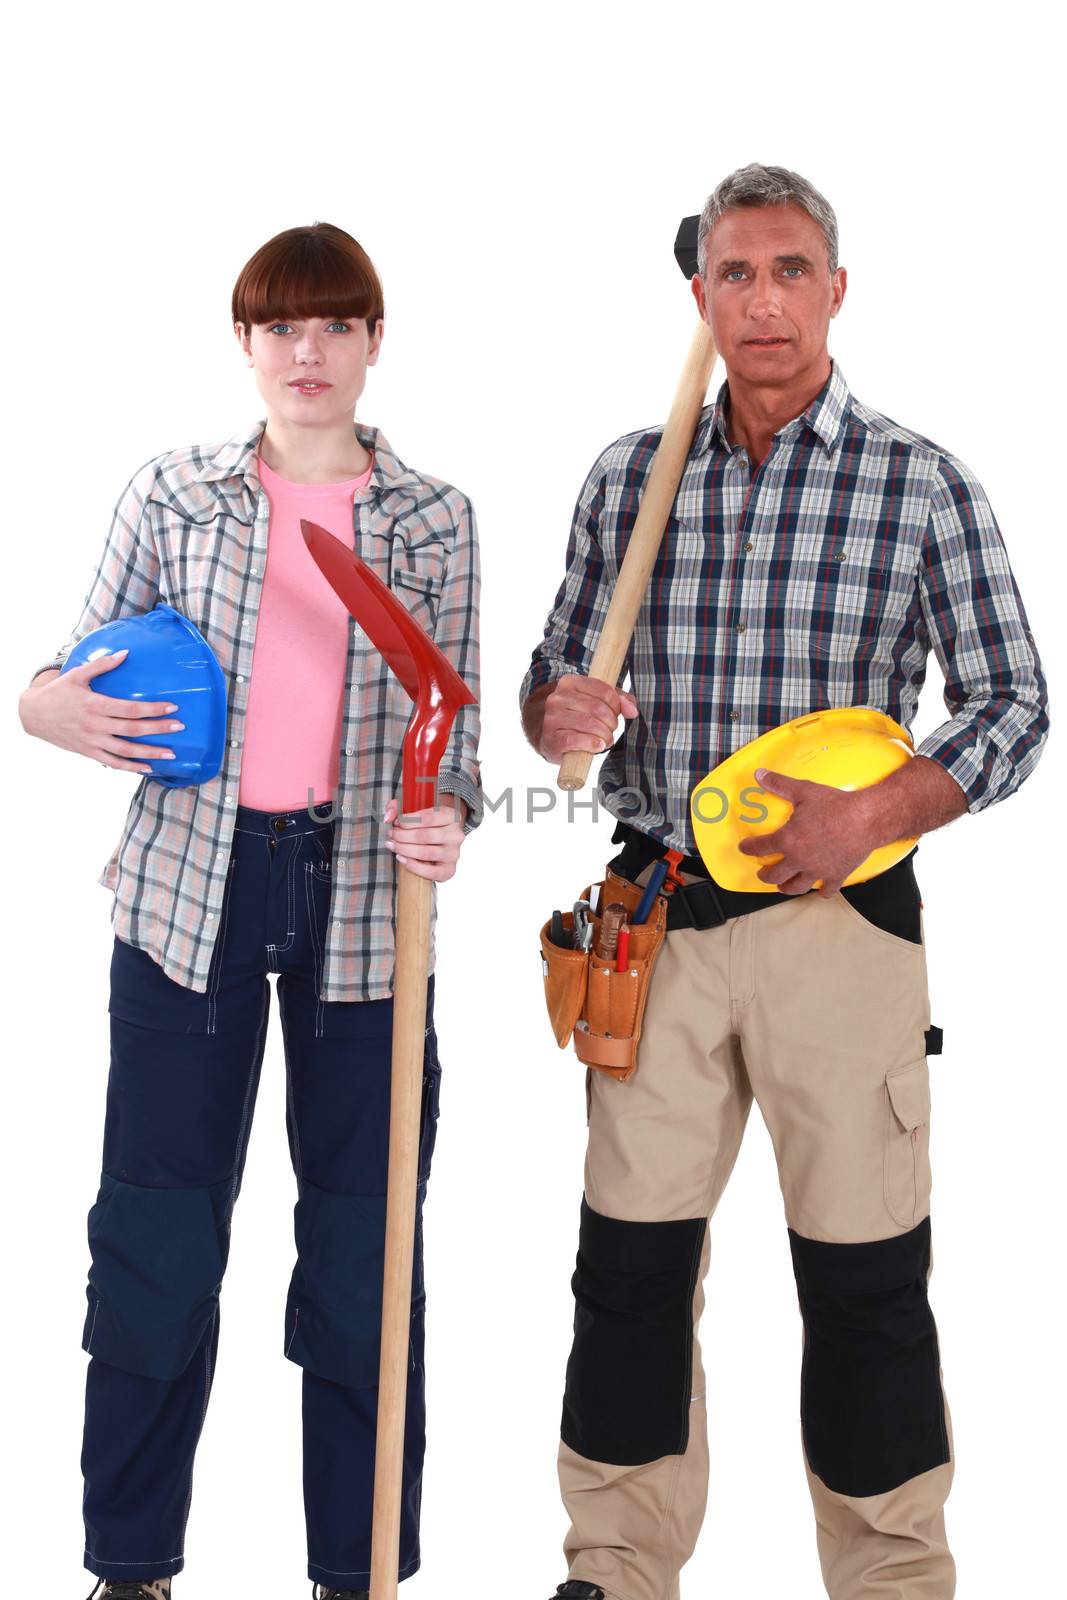 Couple ready for DIY project by phovoir